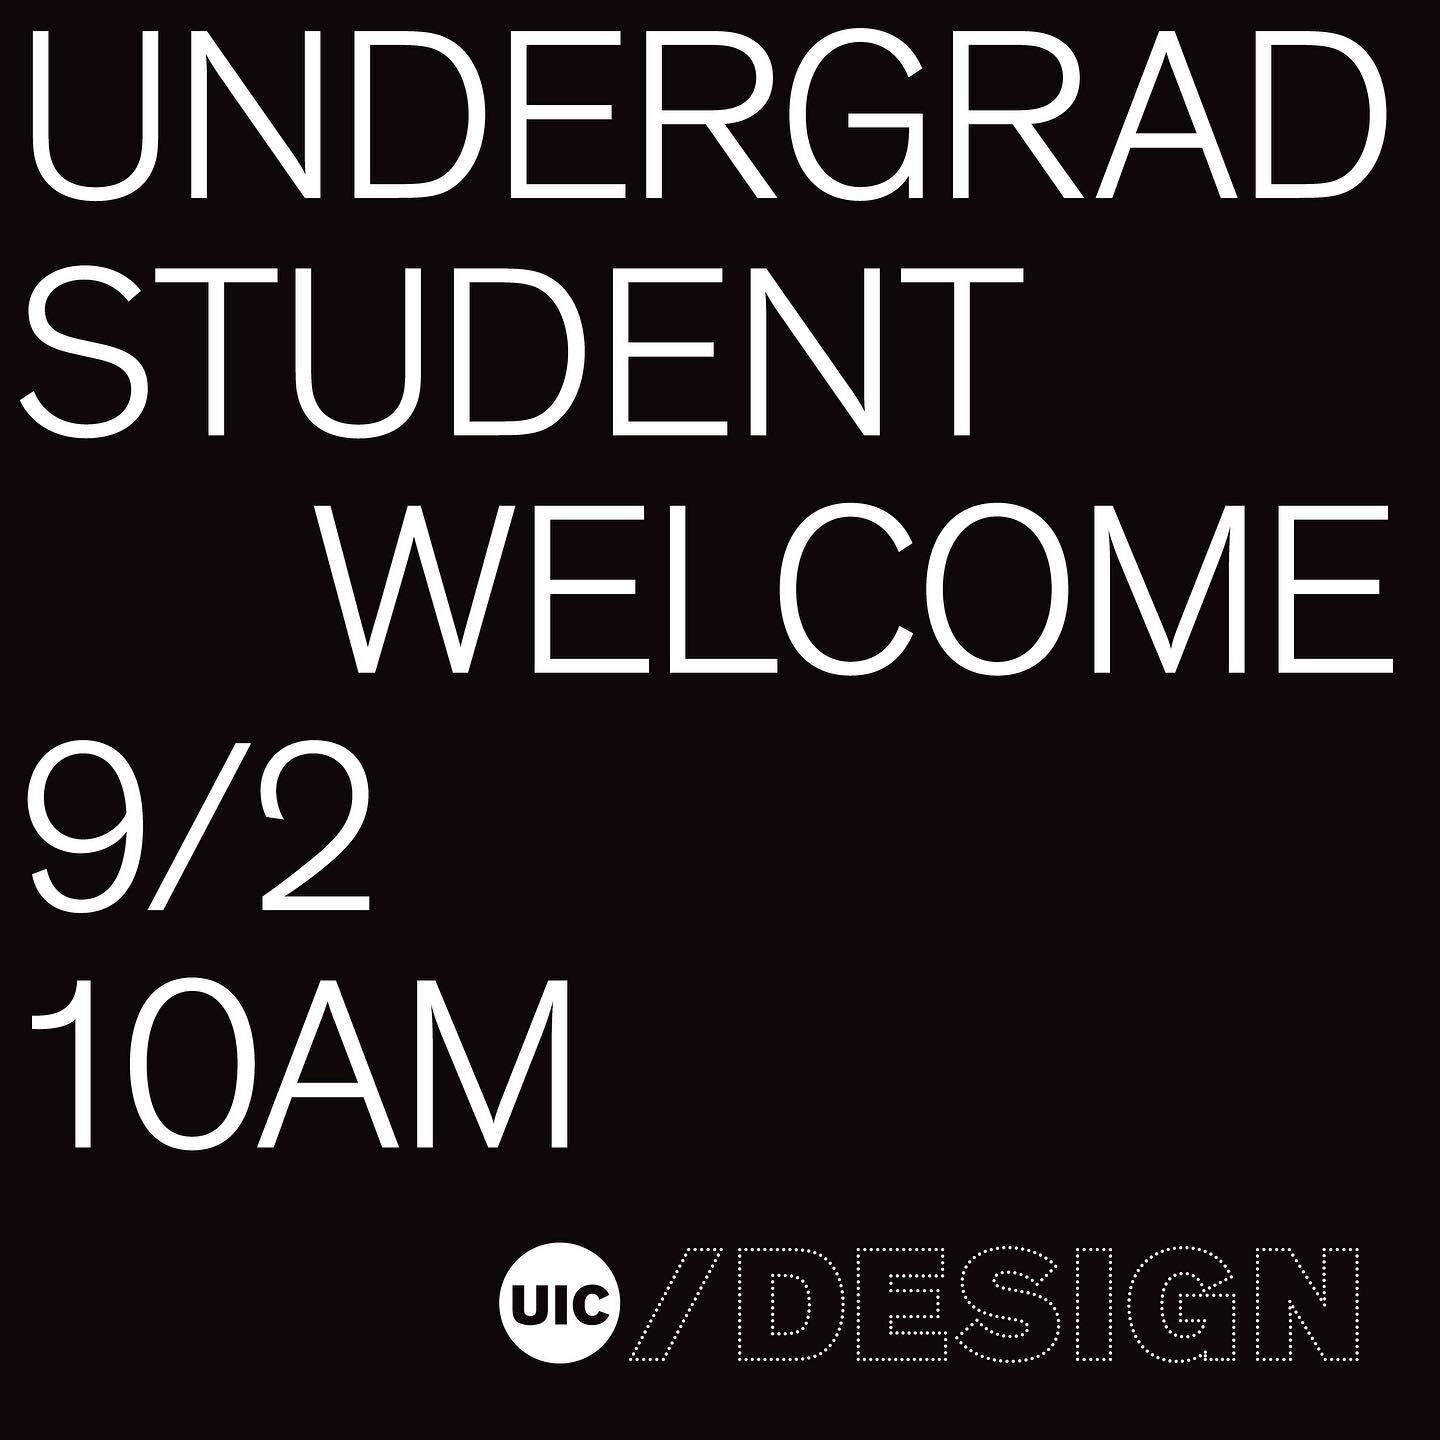 Who: UIC Design Undergraduate students and faculty
What: UIC School of Design Undergraduate Welcome Breakfast
When: Friday, 9/02 at 10:00am
Where: 1300 ADS
Why: Breakfast, Gifts, and more

#uicdesign #uic #uiccada #uicflames #undergraduate #designsch